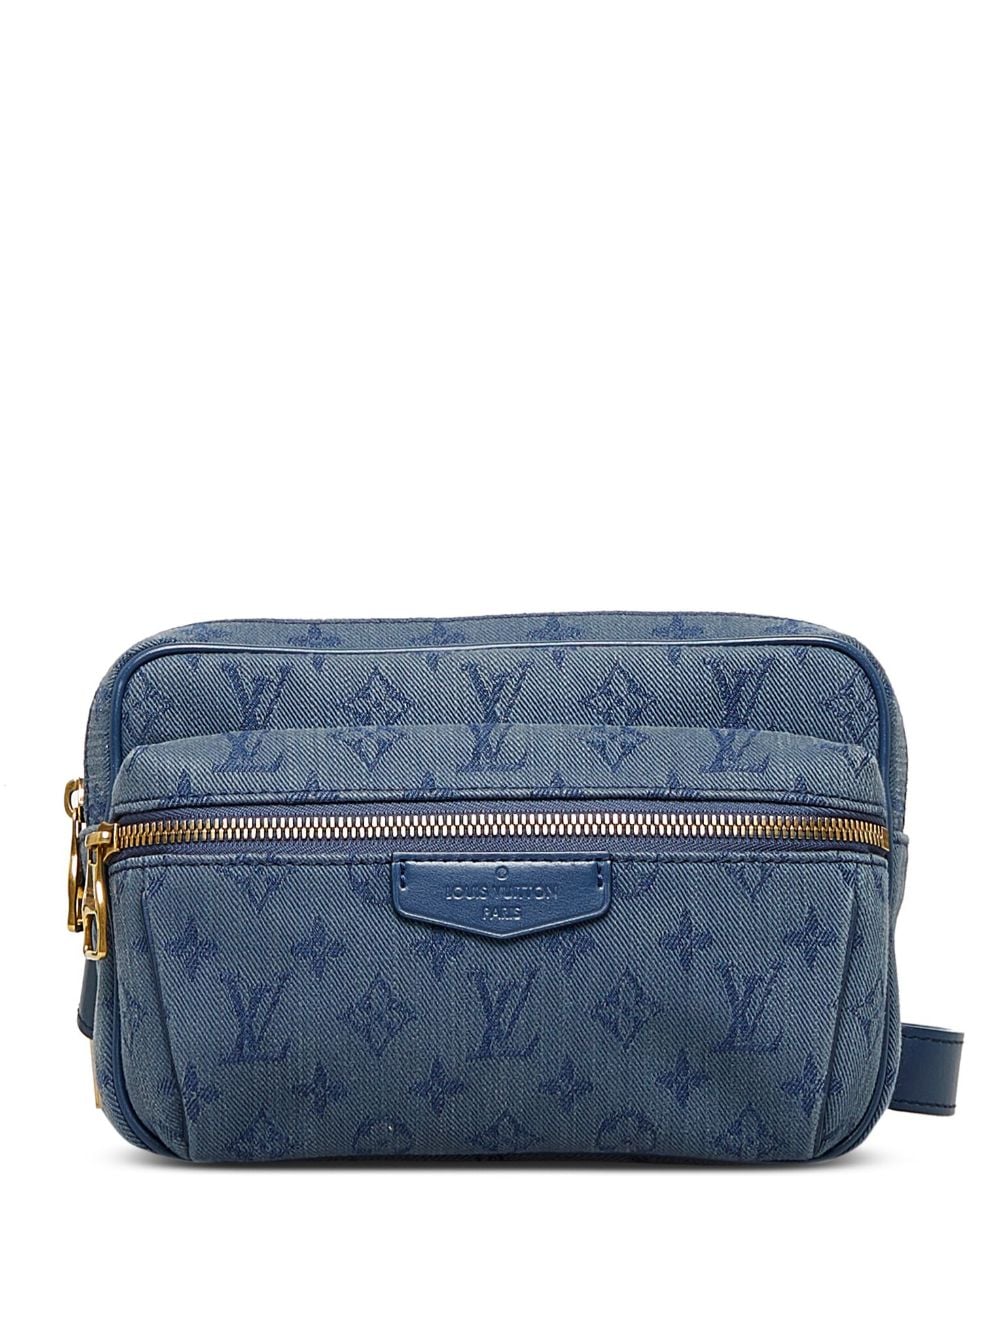 Louis Vuitton Pre-Owned 2019 pre-owned Outdoor denim belt bag - Blue von Louis Vuitton Pre-Owned